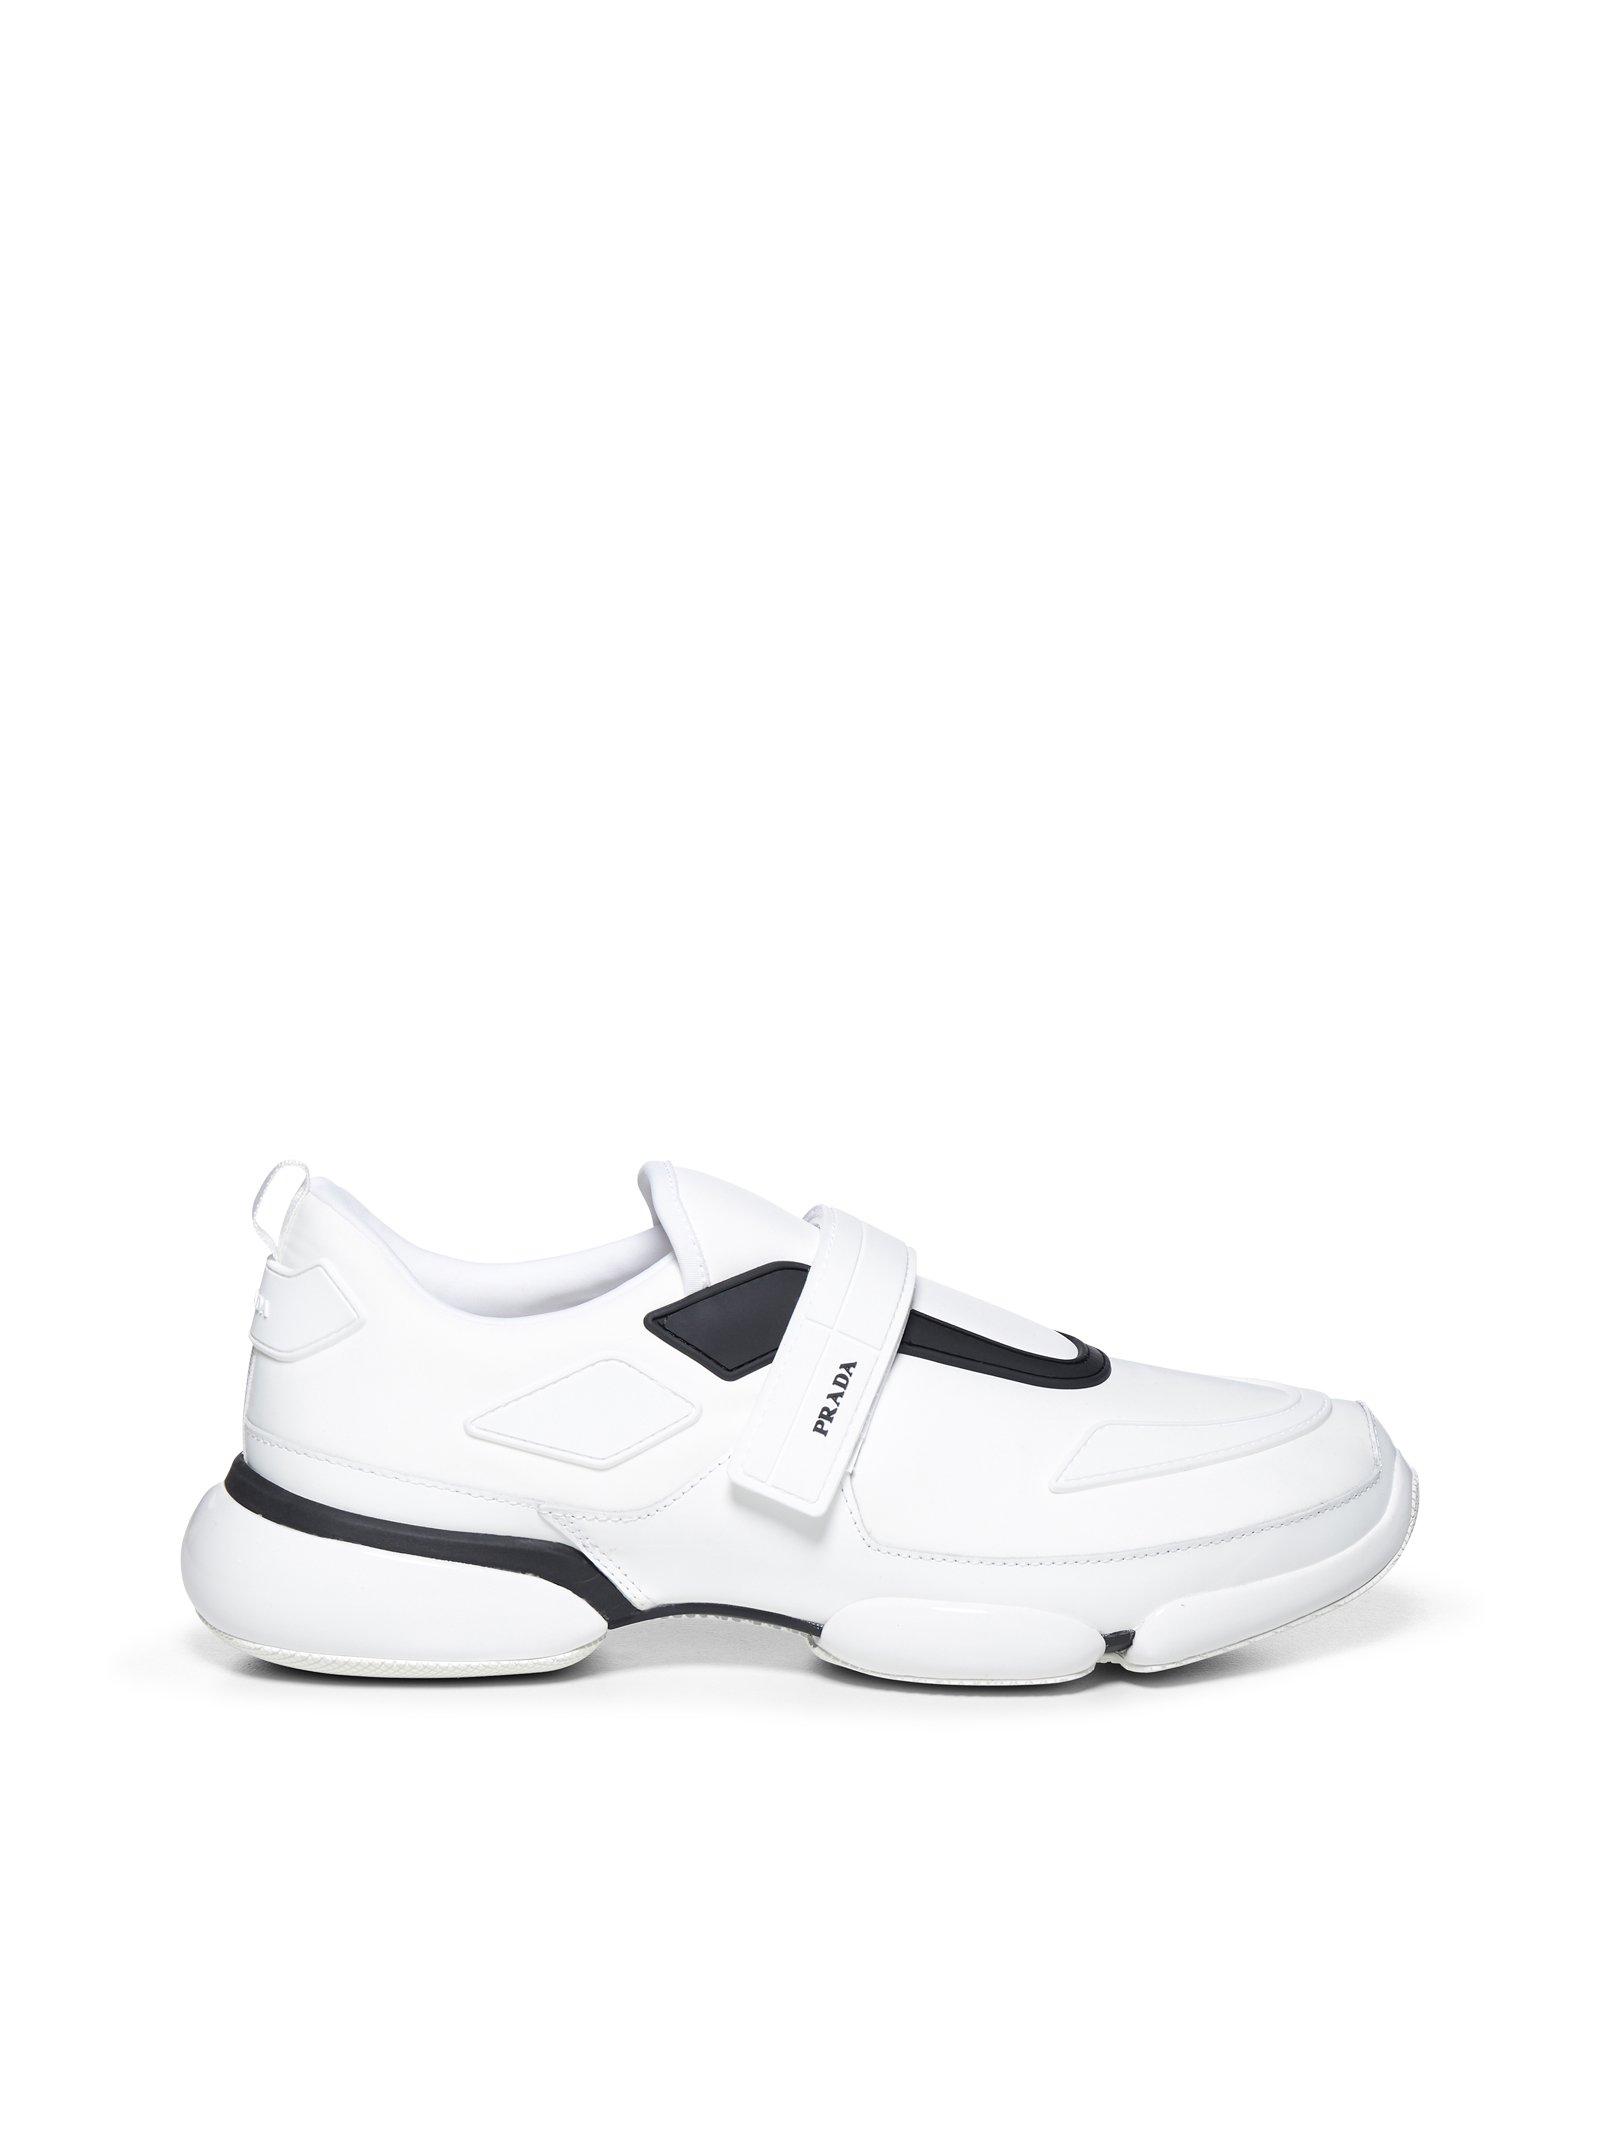 Prada Synthetic Cloudbust Low Top Sneakers in White for Men - Lyst